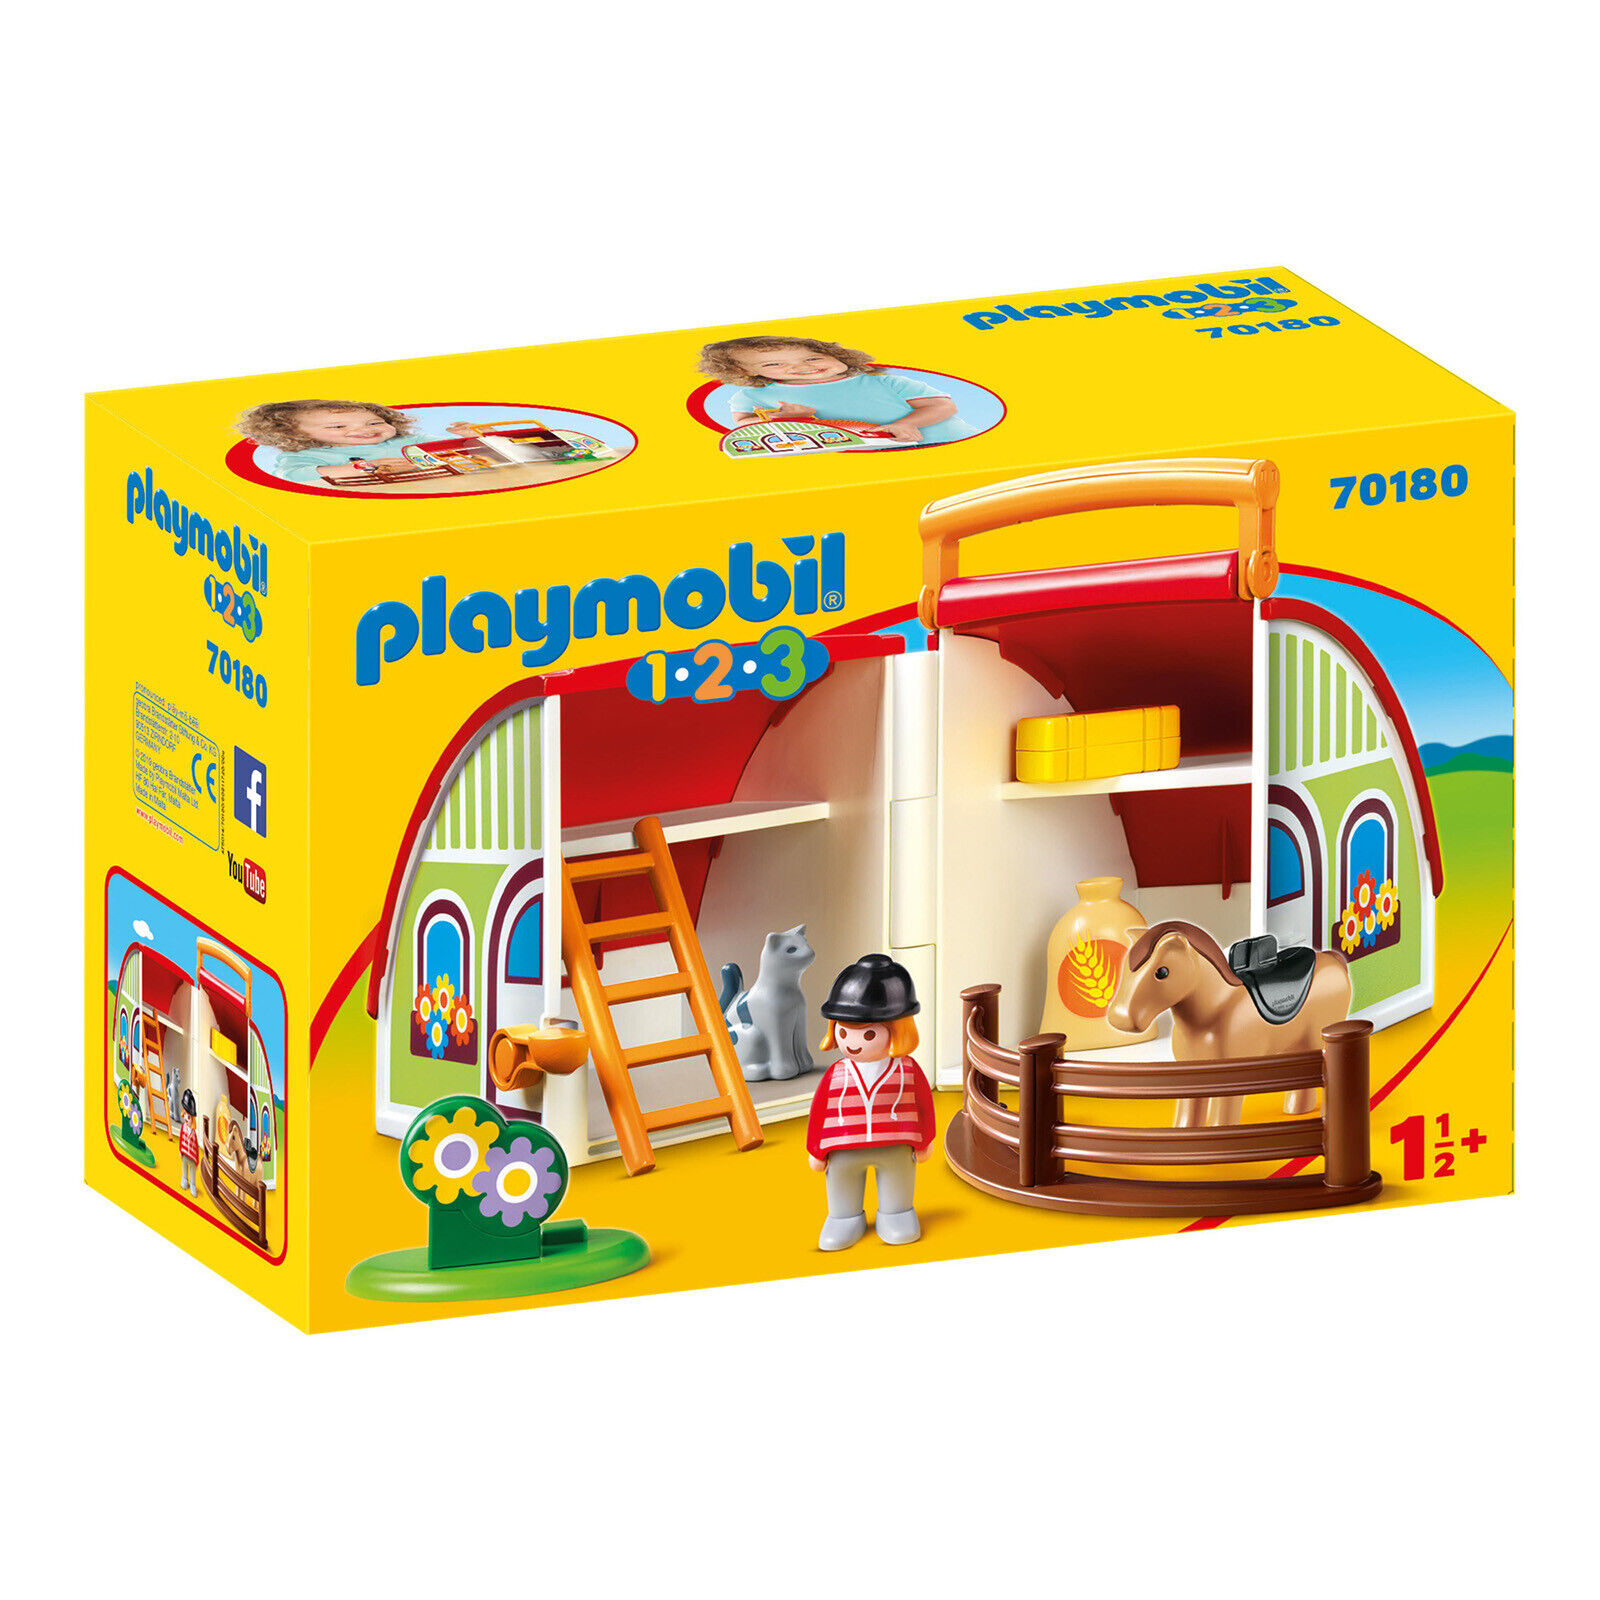 Outils playmobil ref 123 